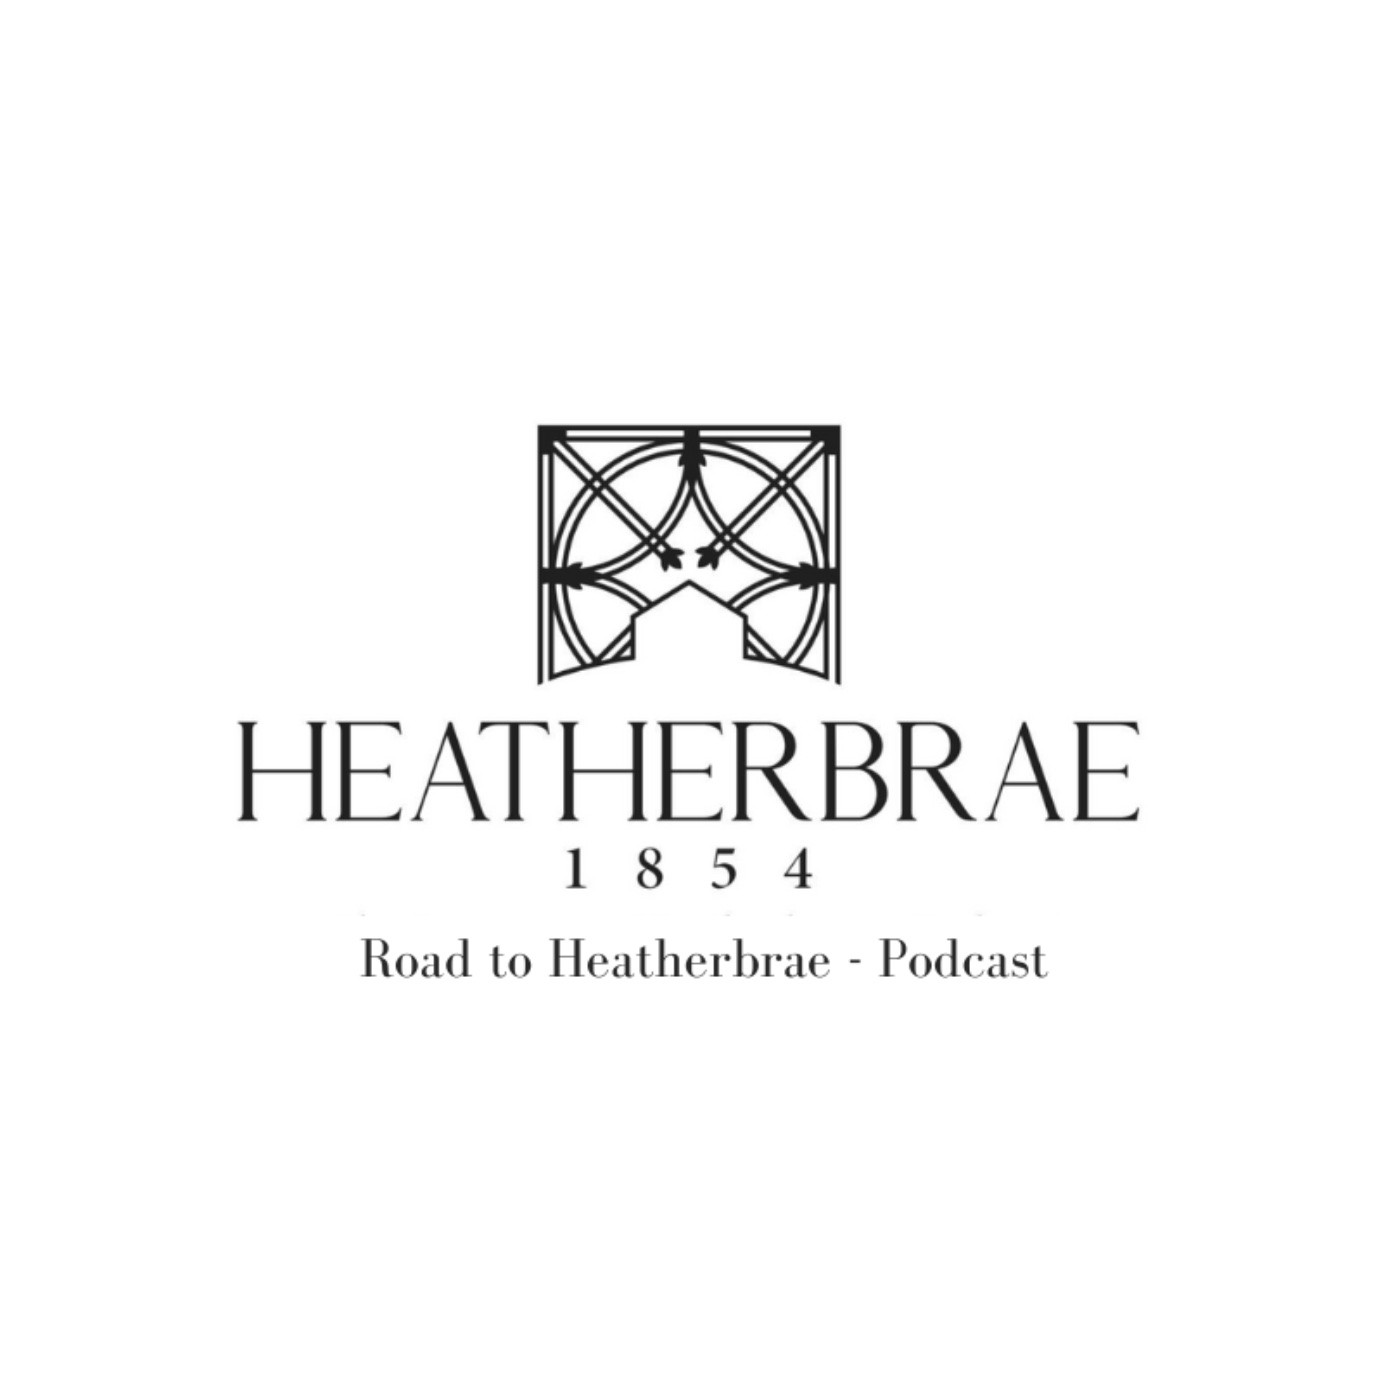 Ep 1: The Road to Heatherbrae1854 - Pilot